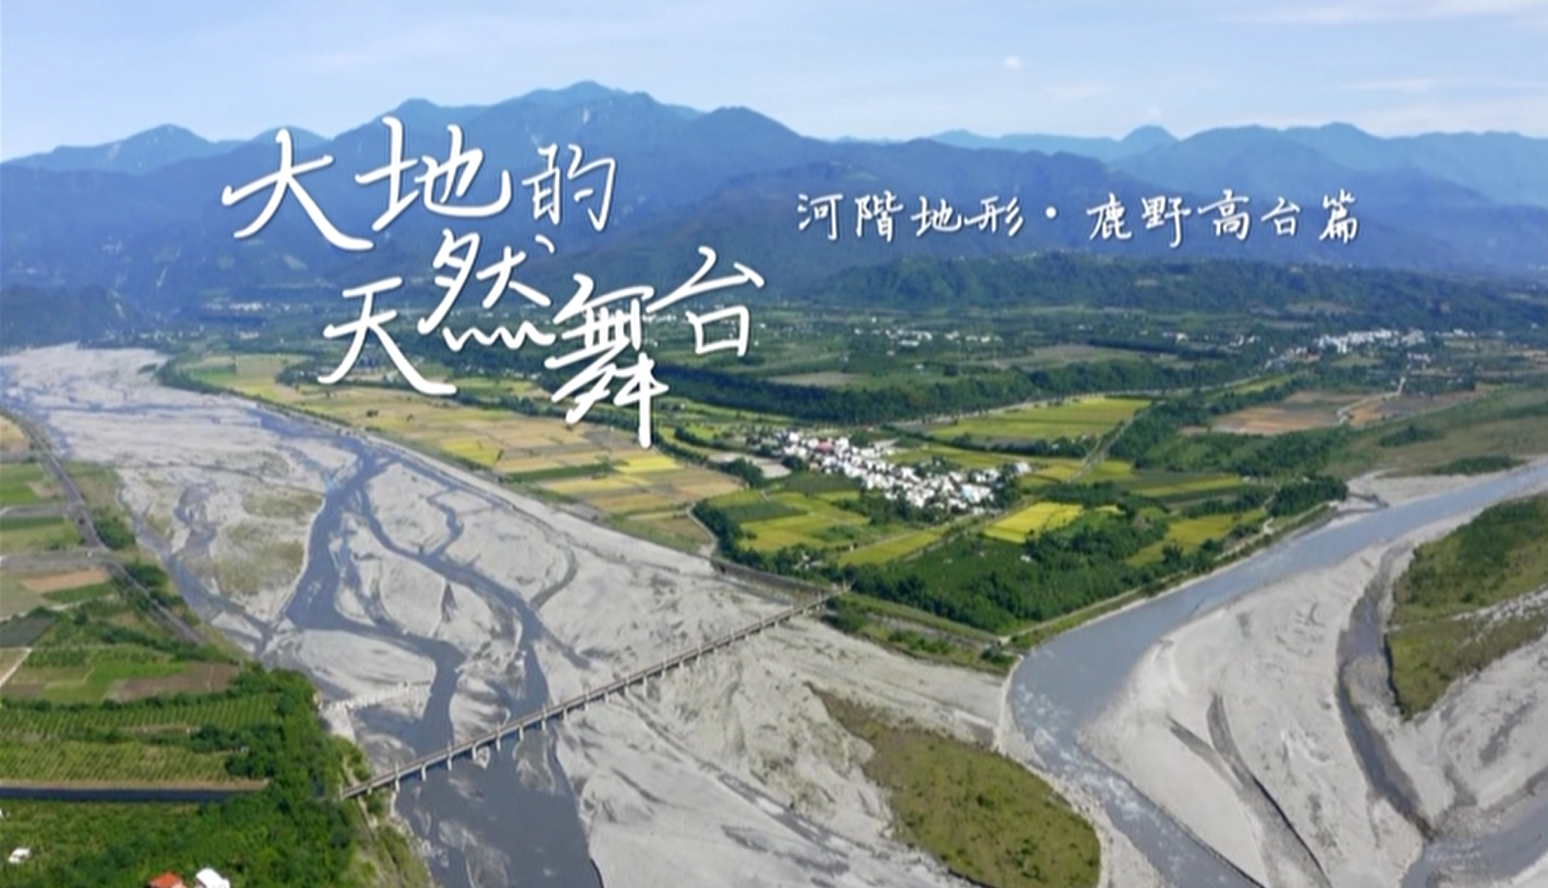 East Rift Valley Geological Landscape Tourism Promotional Video：Earth's Natural Stage: River Terraces at Luye Highland Chinese